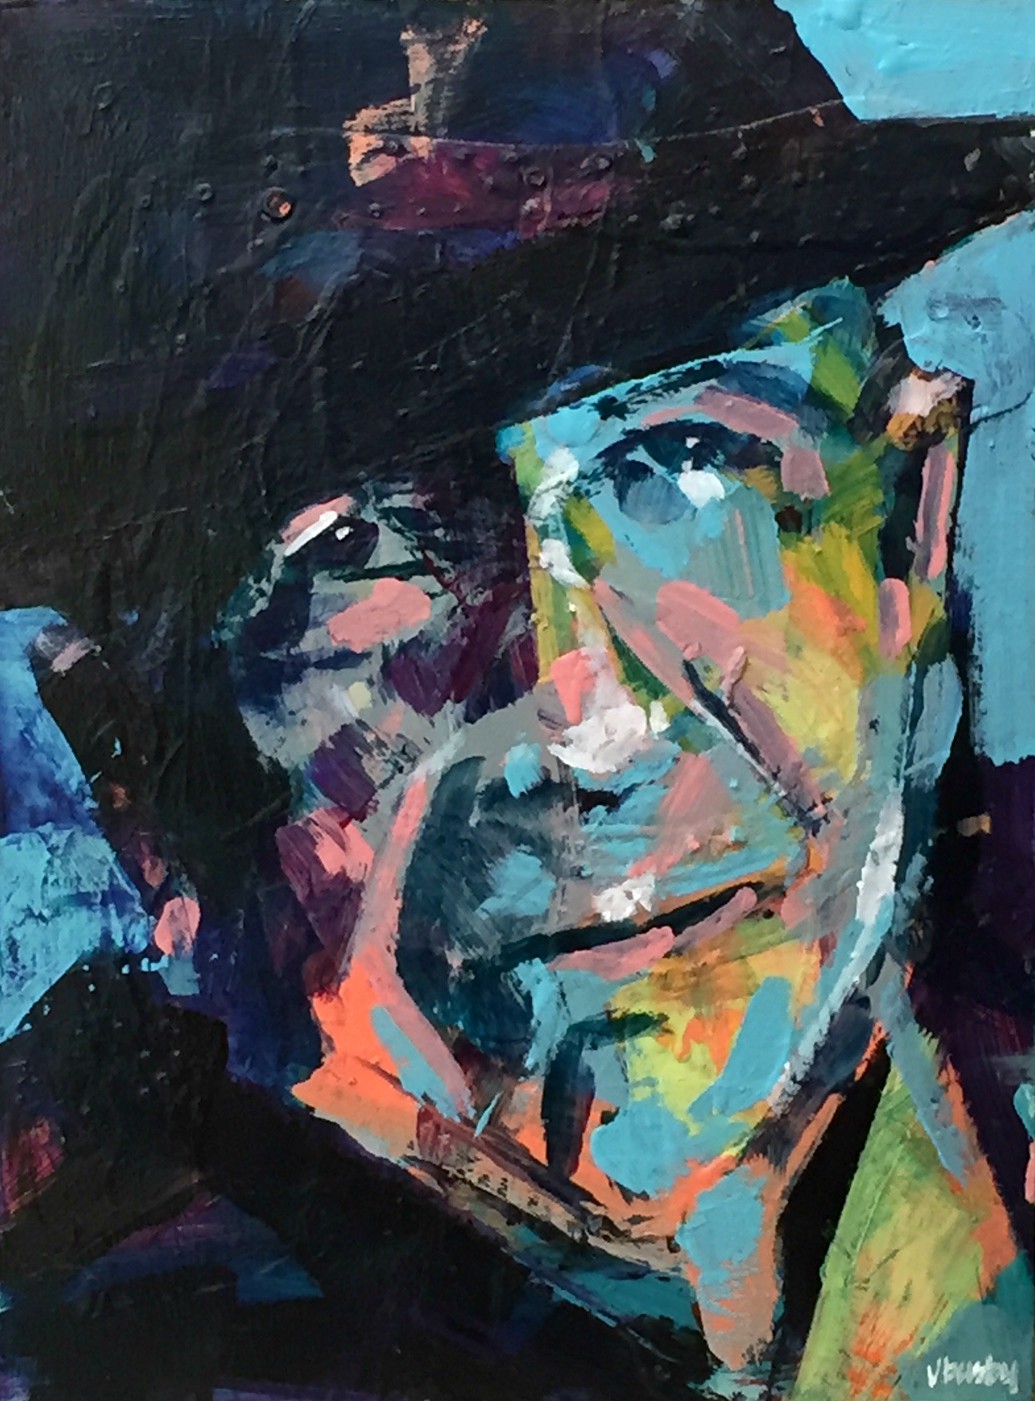 Leonard Cohen painting by Verne Busby | Effusion Art Gallery + Cast Glass Studio, Invermere BC